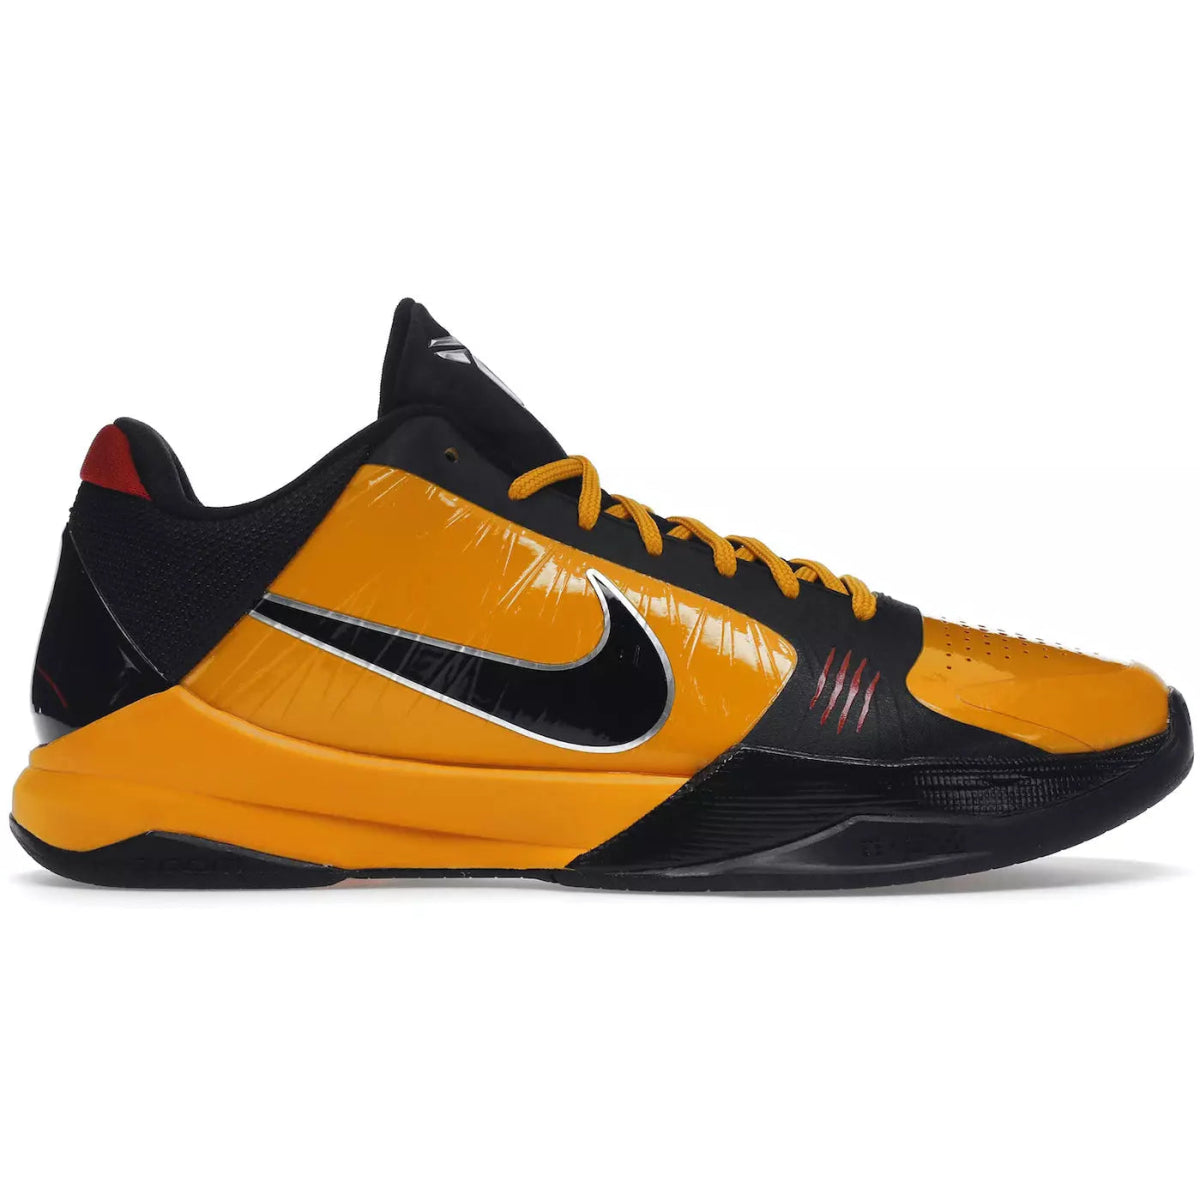 Kobe Bryant Sneakers Are Selling At High Prices But Not